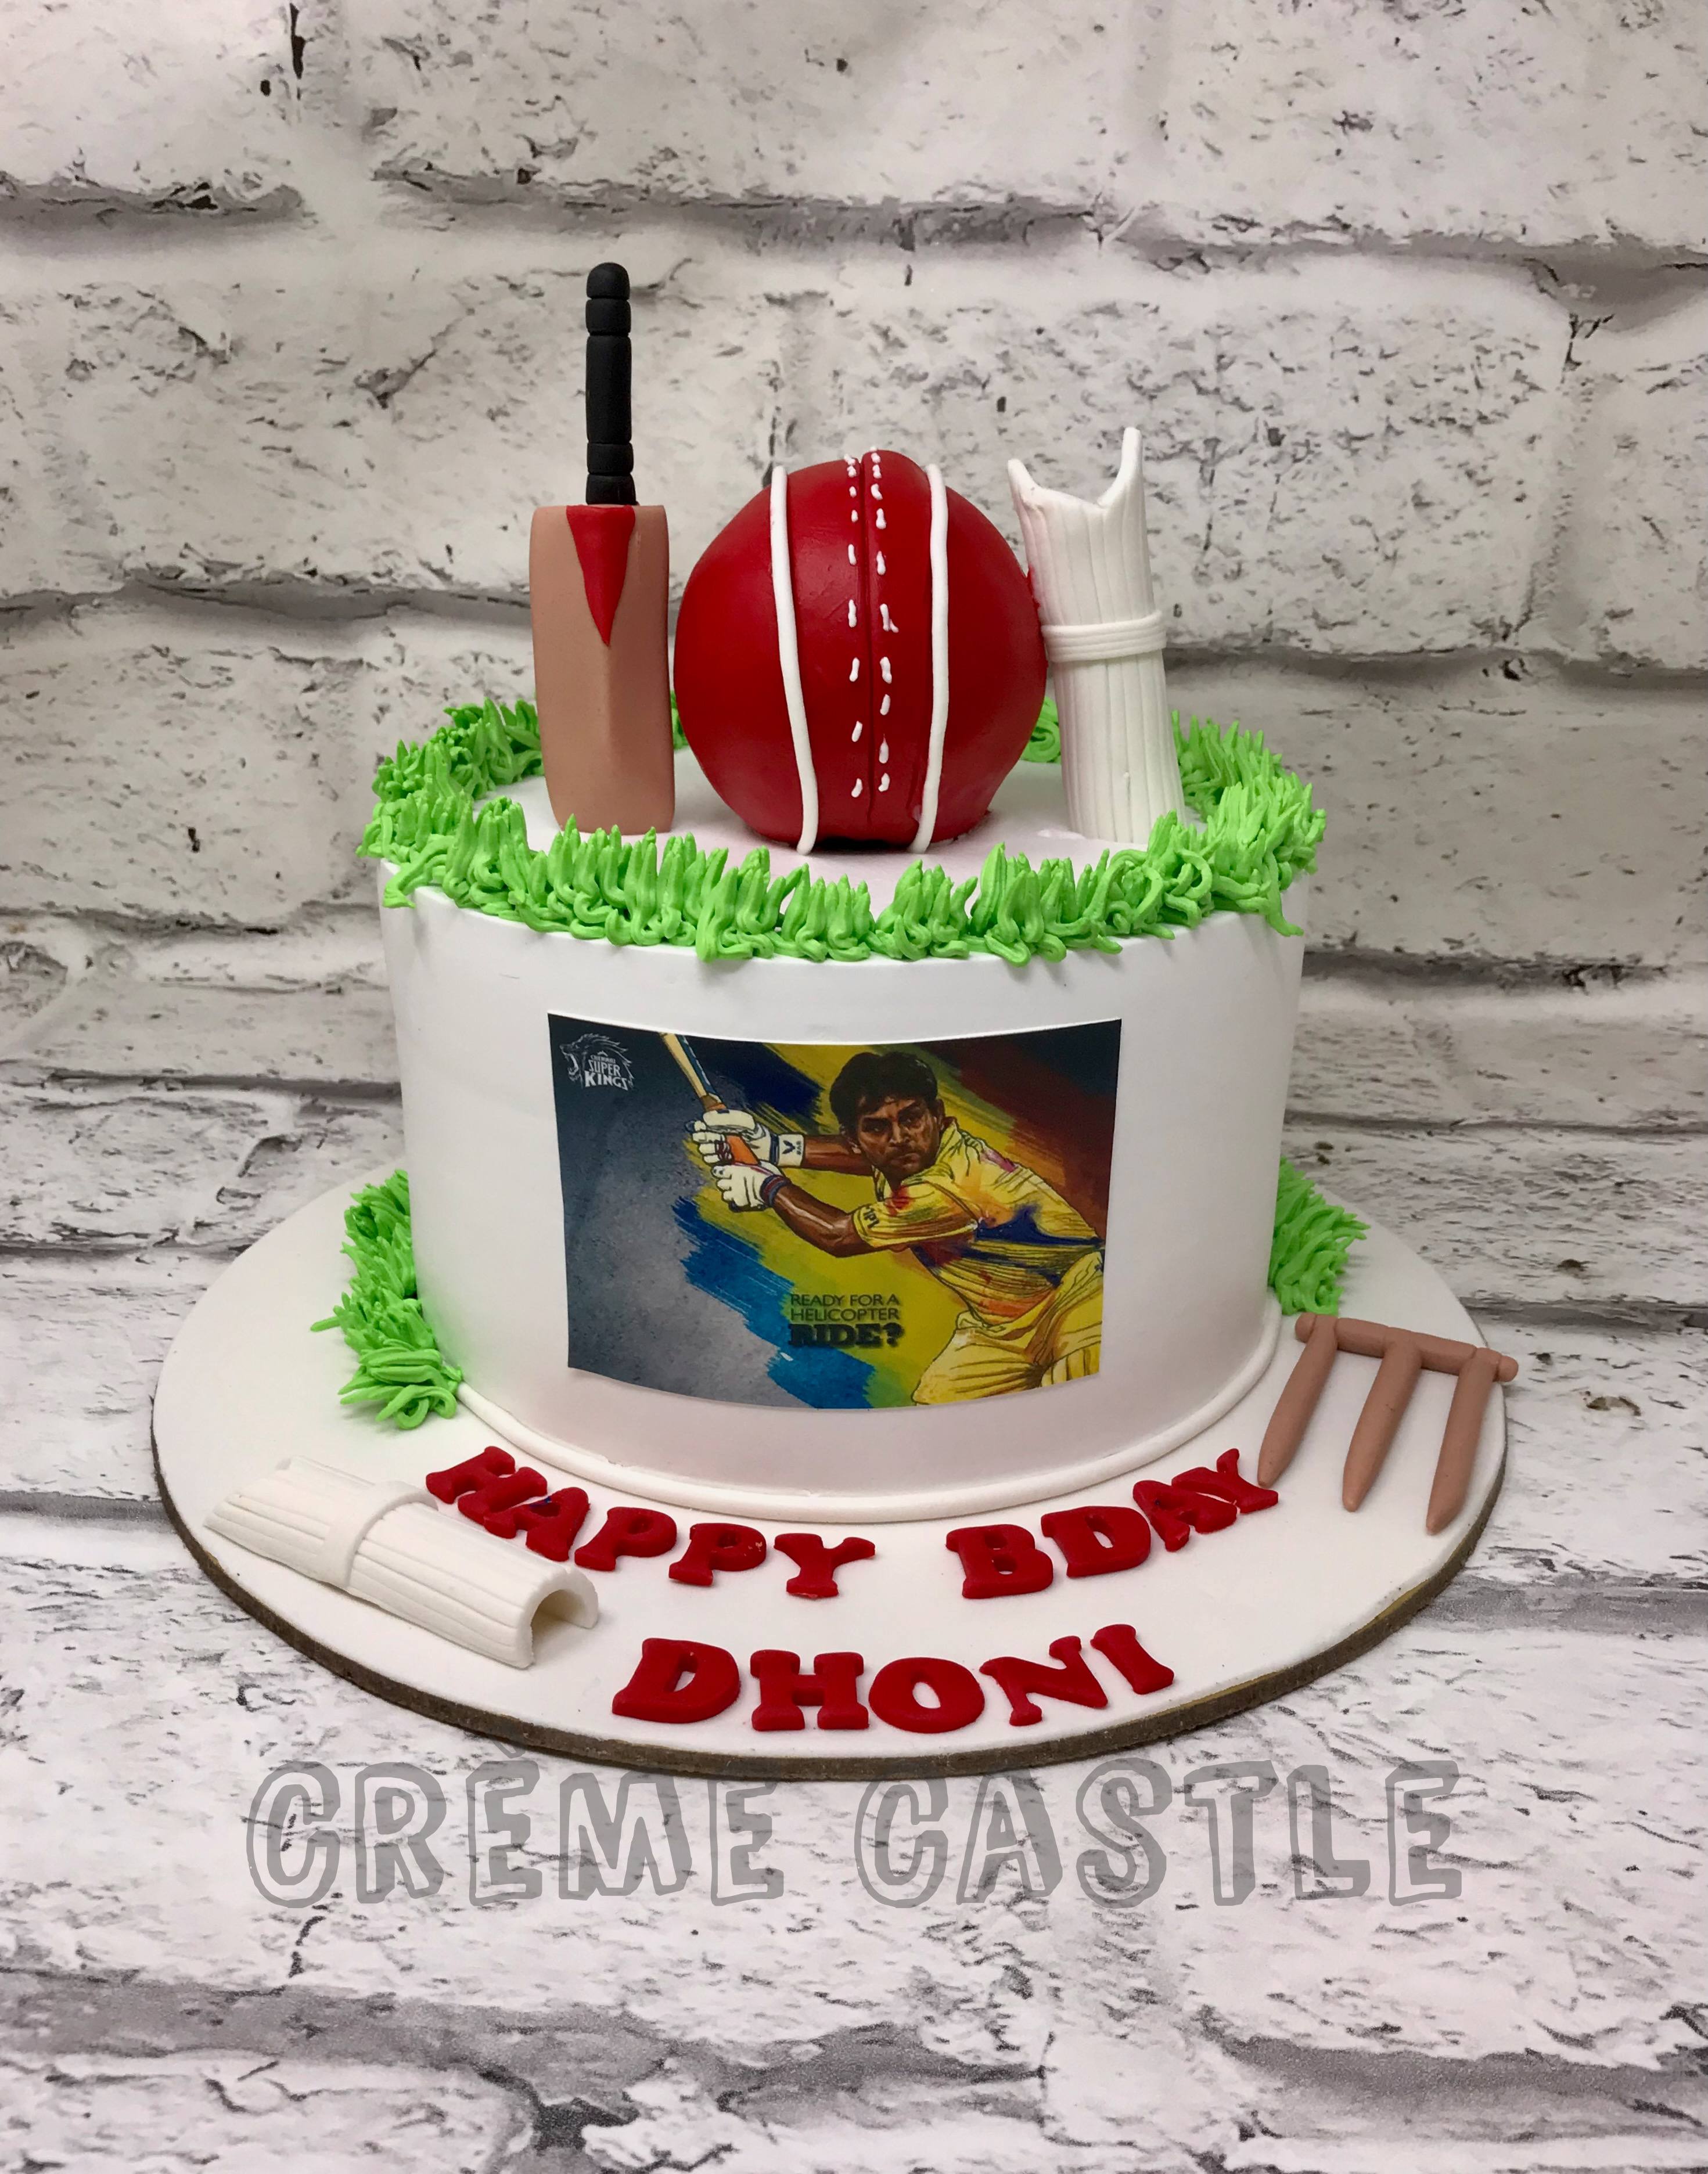 Cricket pitch birthday cake | Women's Weekly Food